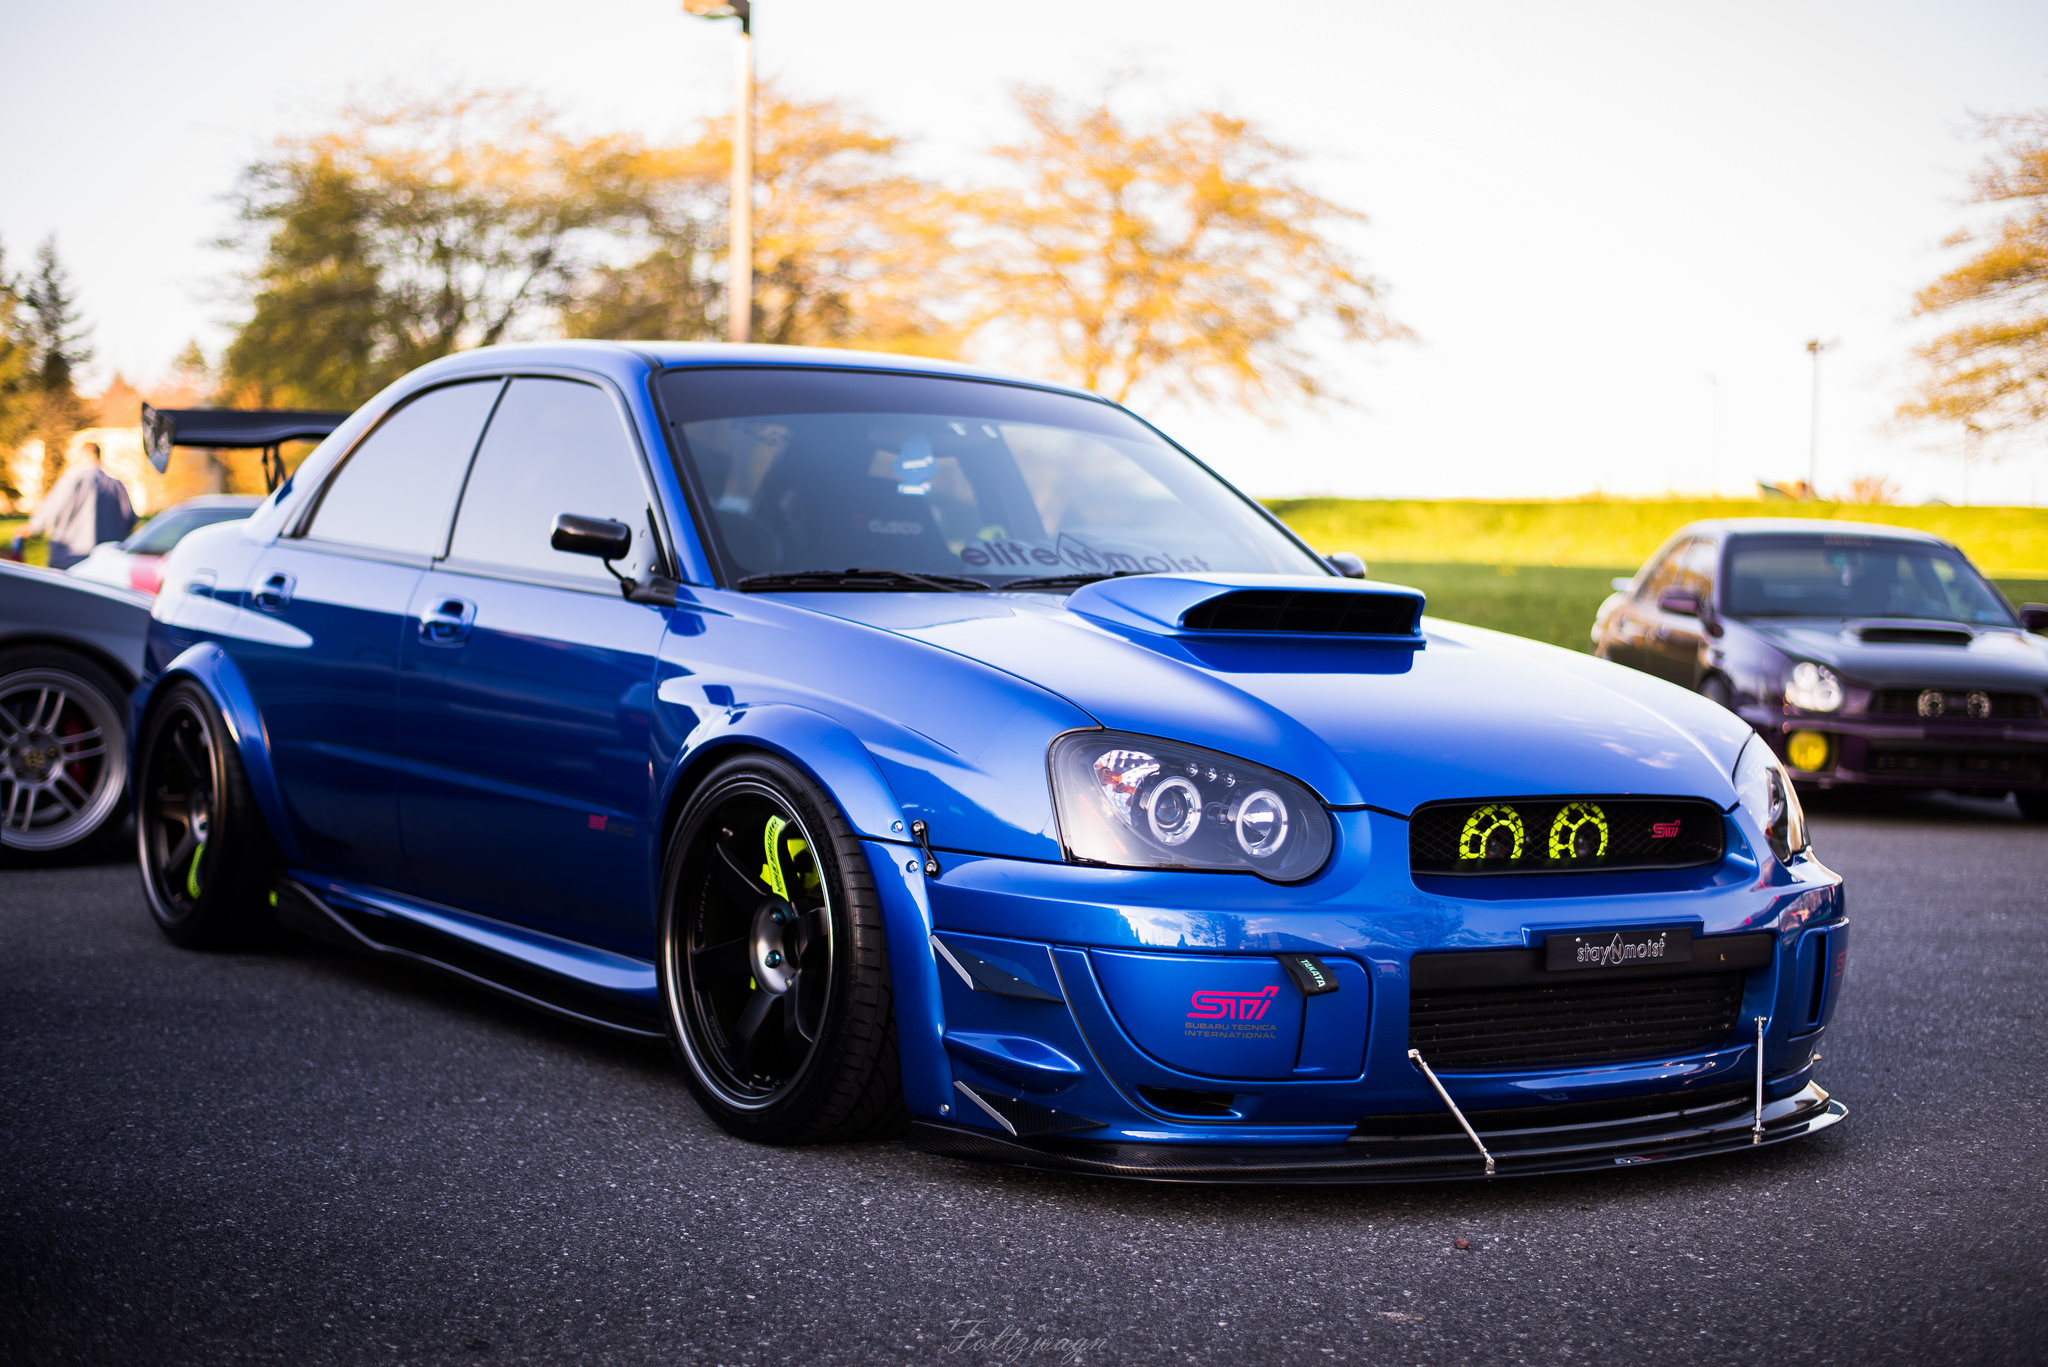 2048x1367 Love Everything About This Sti.